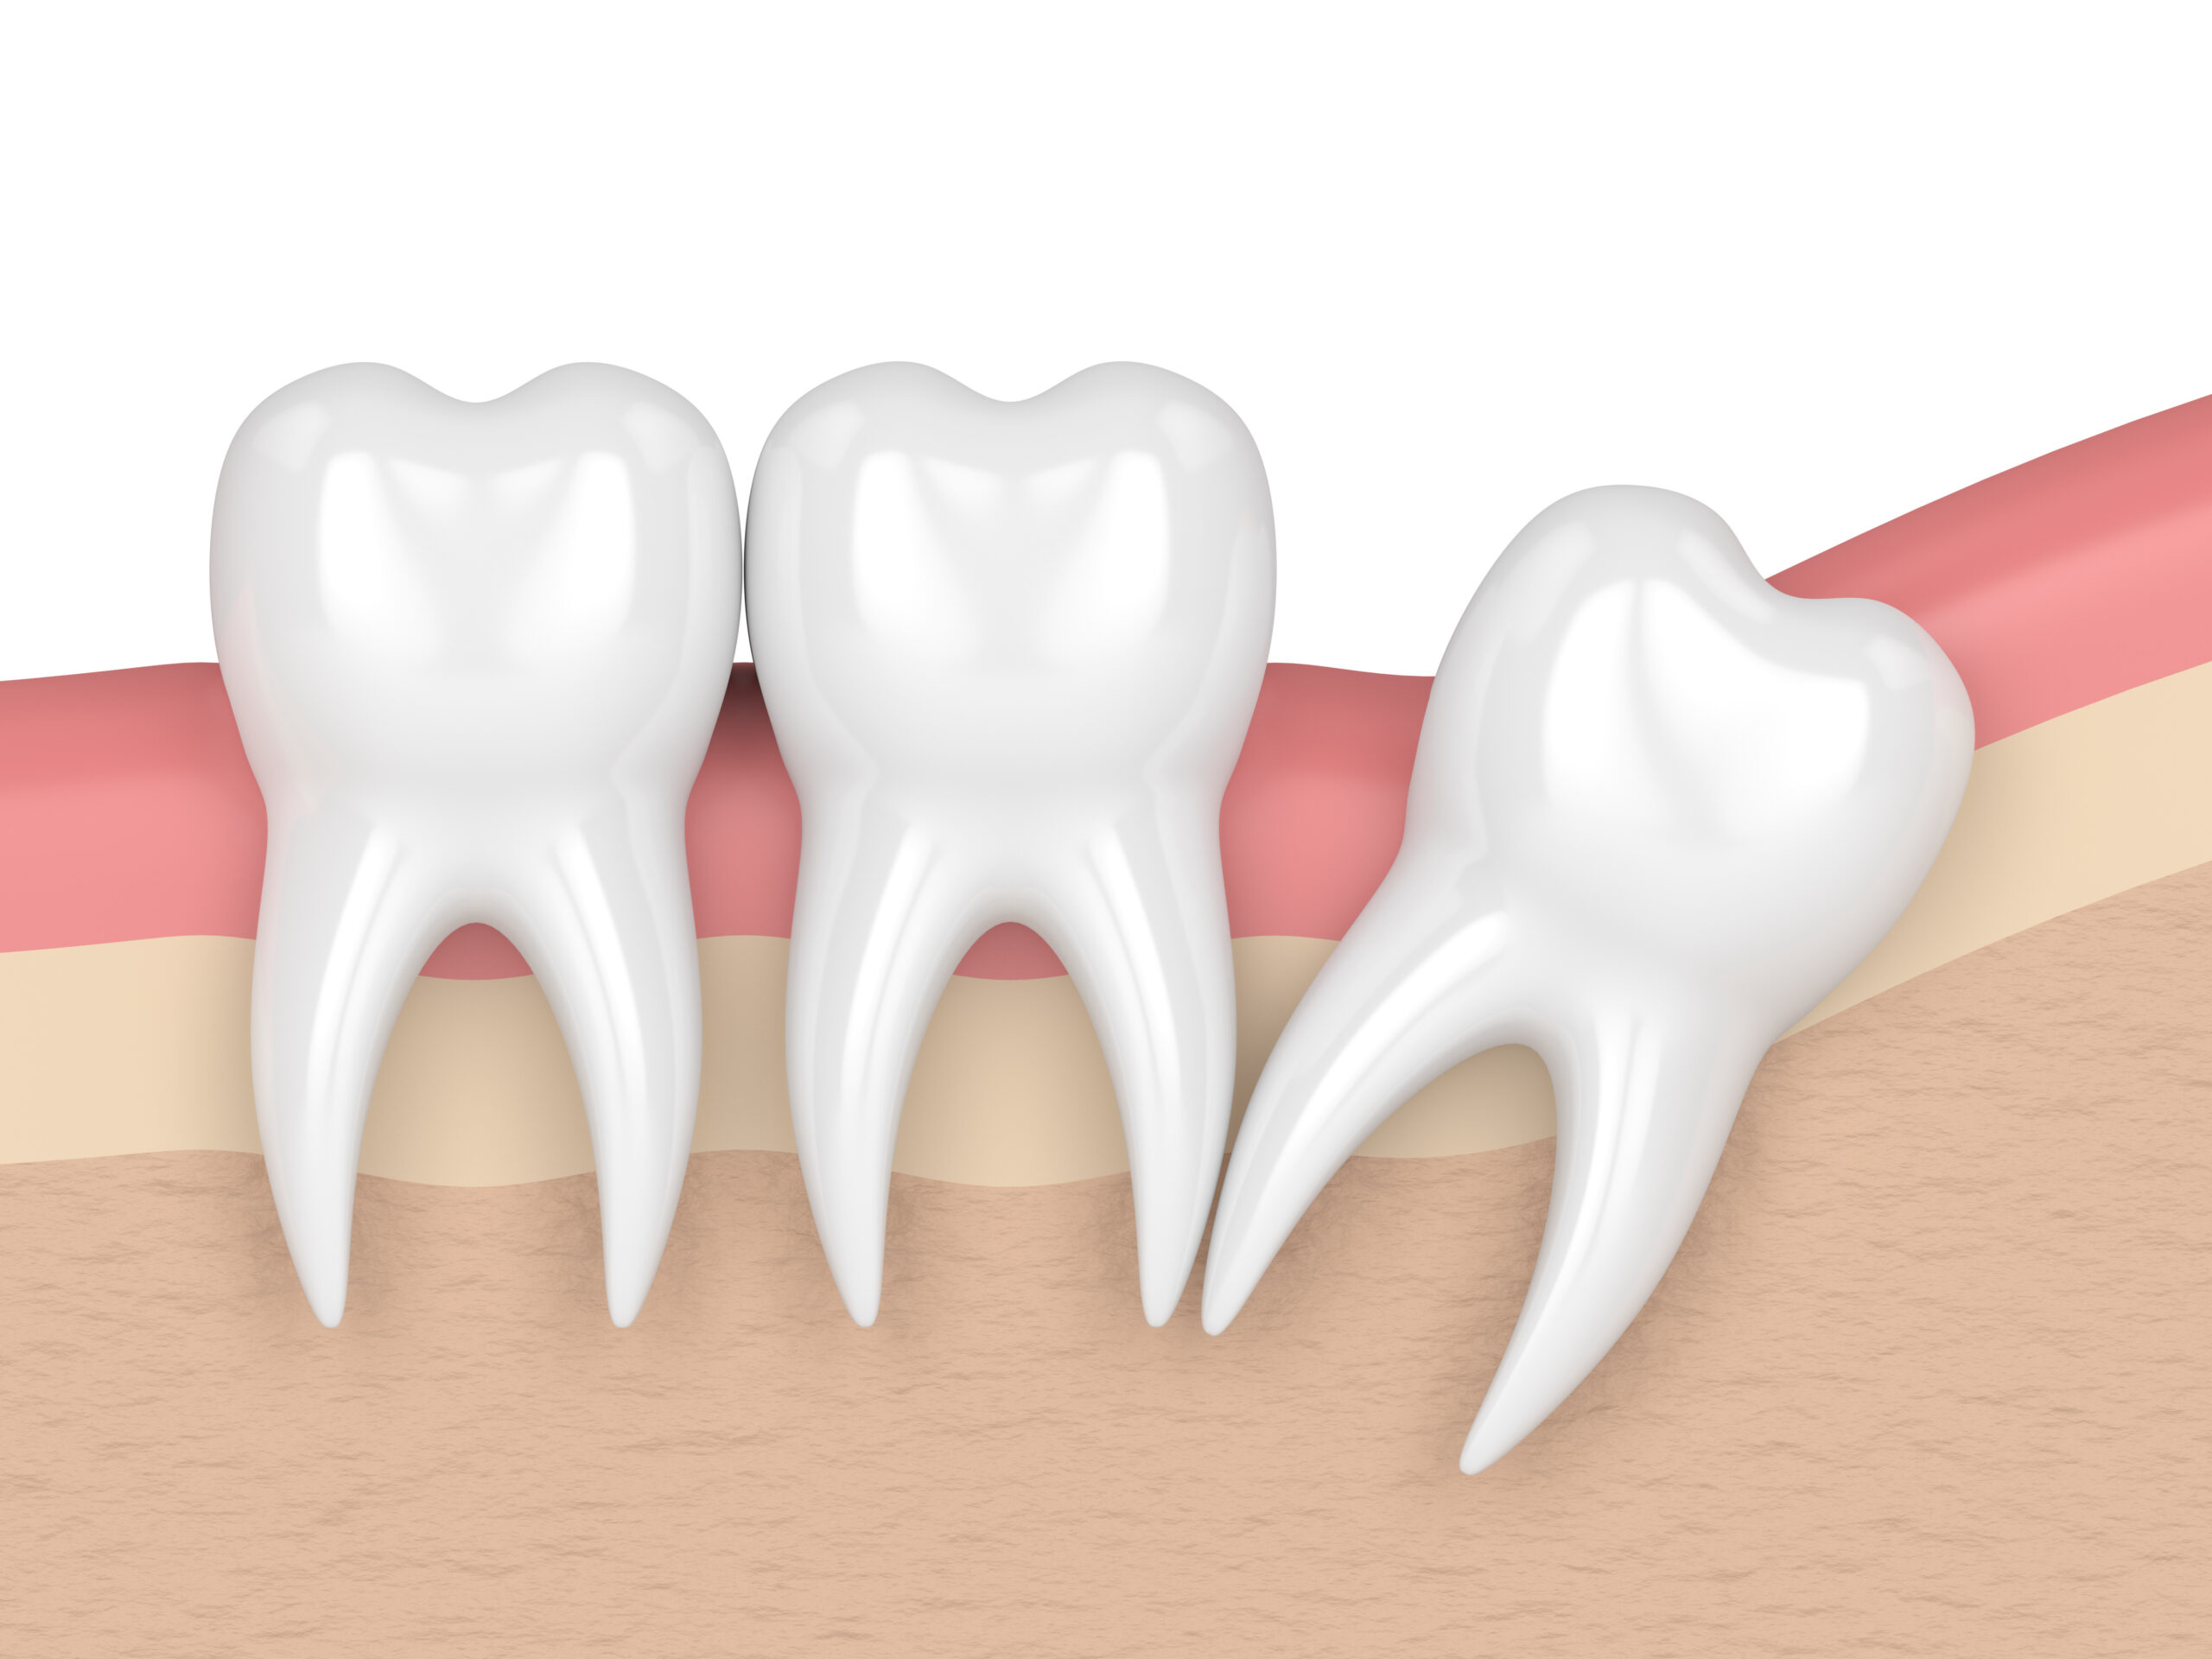 3d render of teeth with wisdom distal impaction.